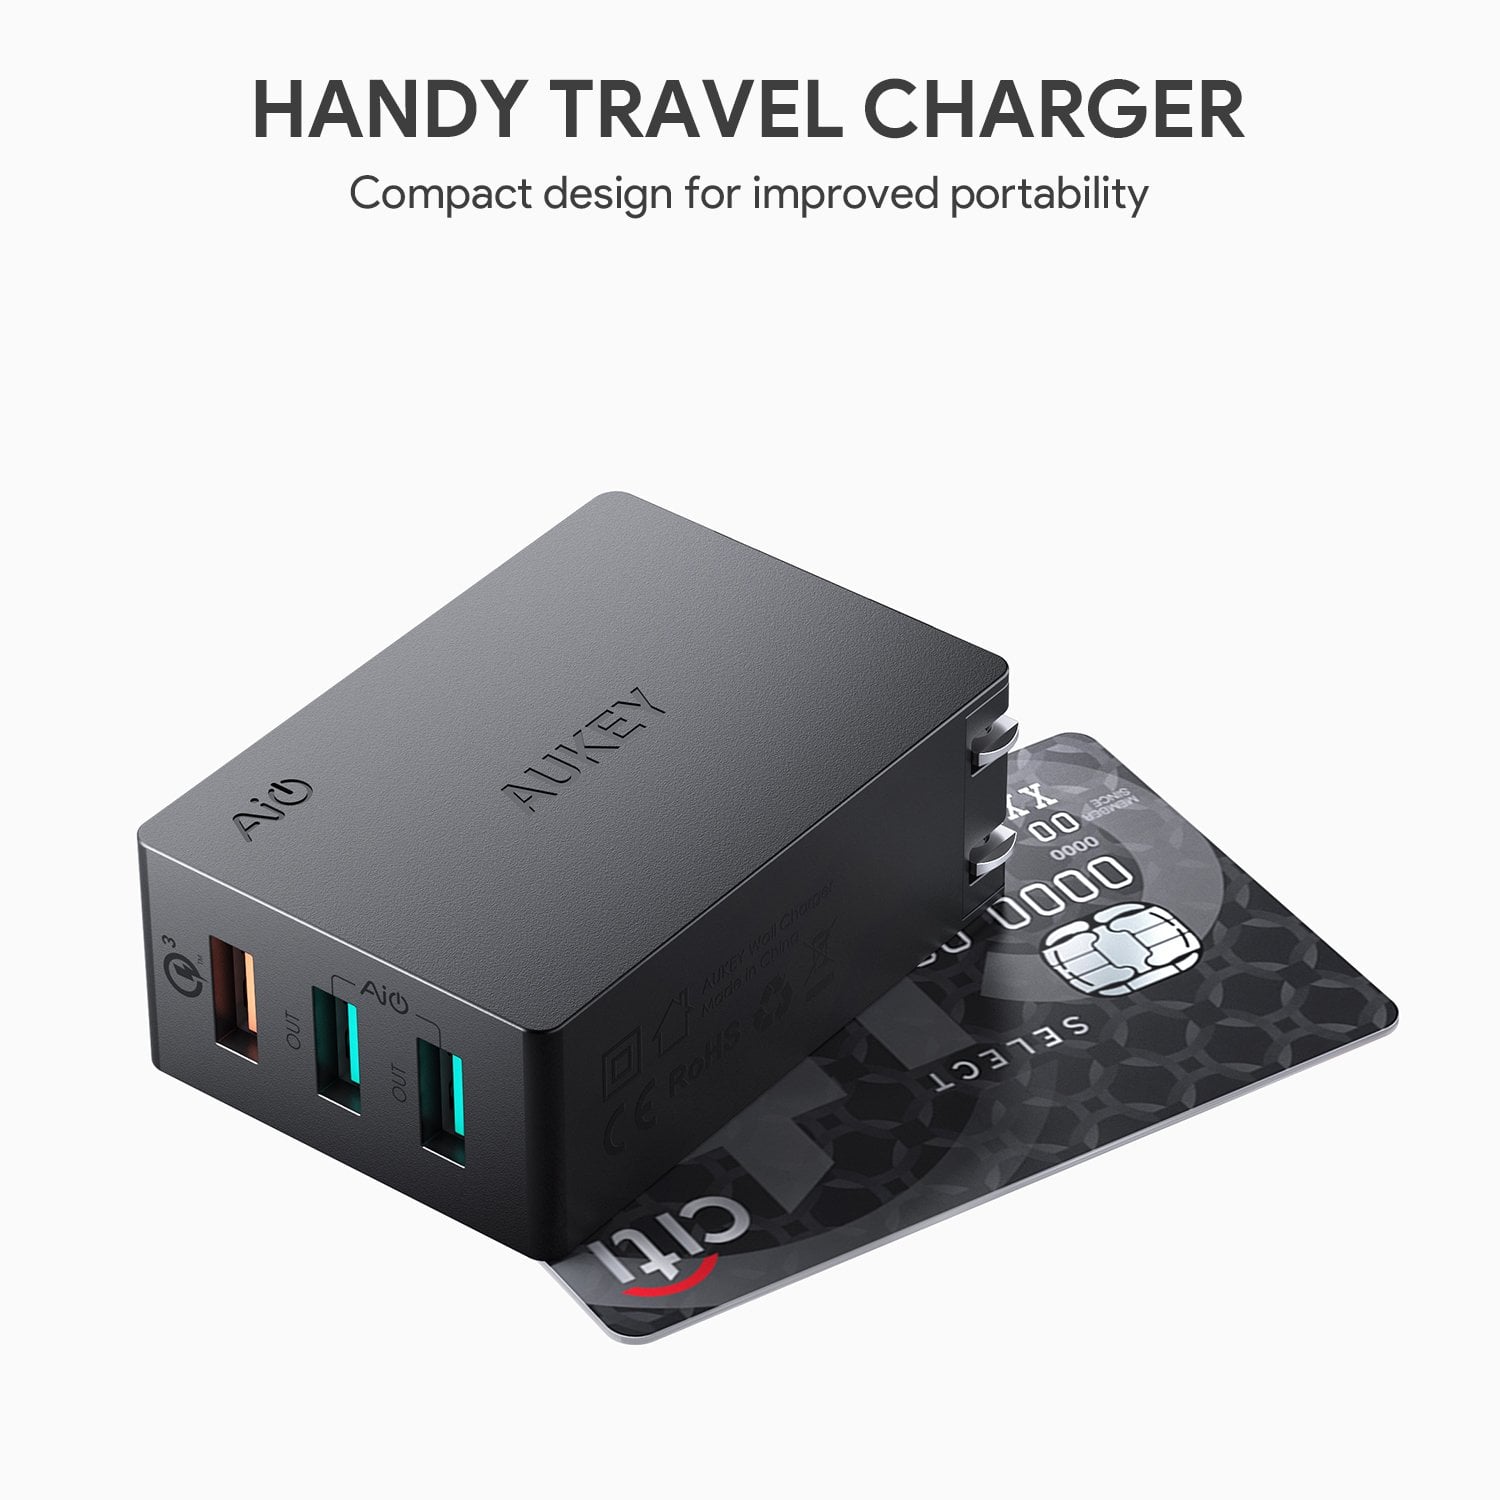 HANDY TRAVEL CHARGER Compact design for improved portability